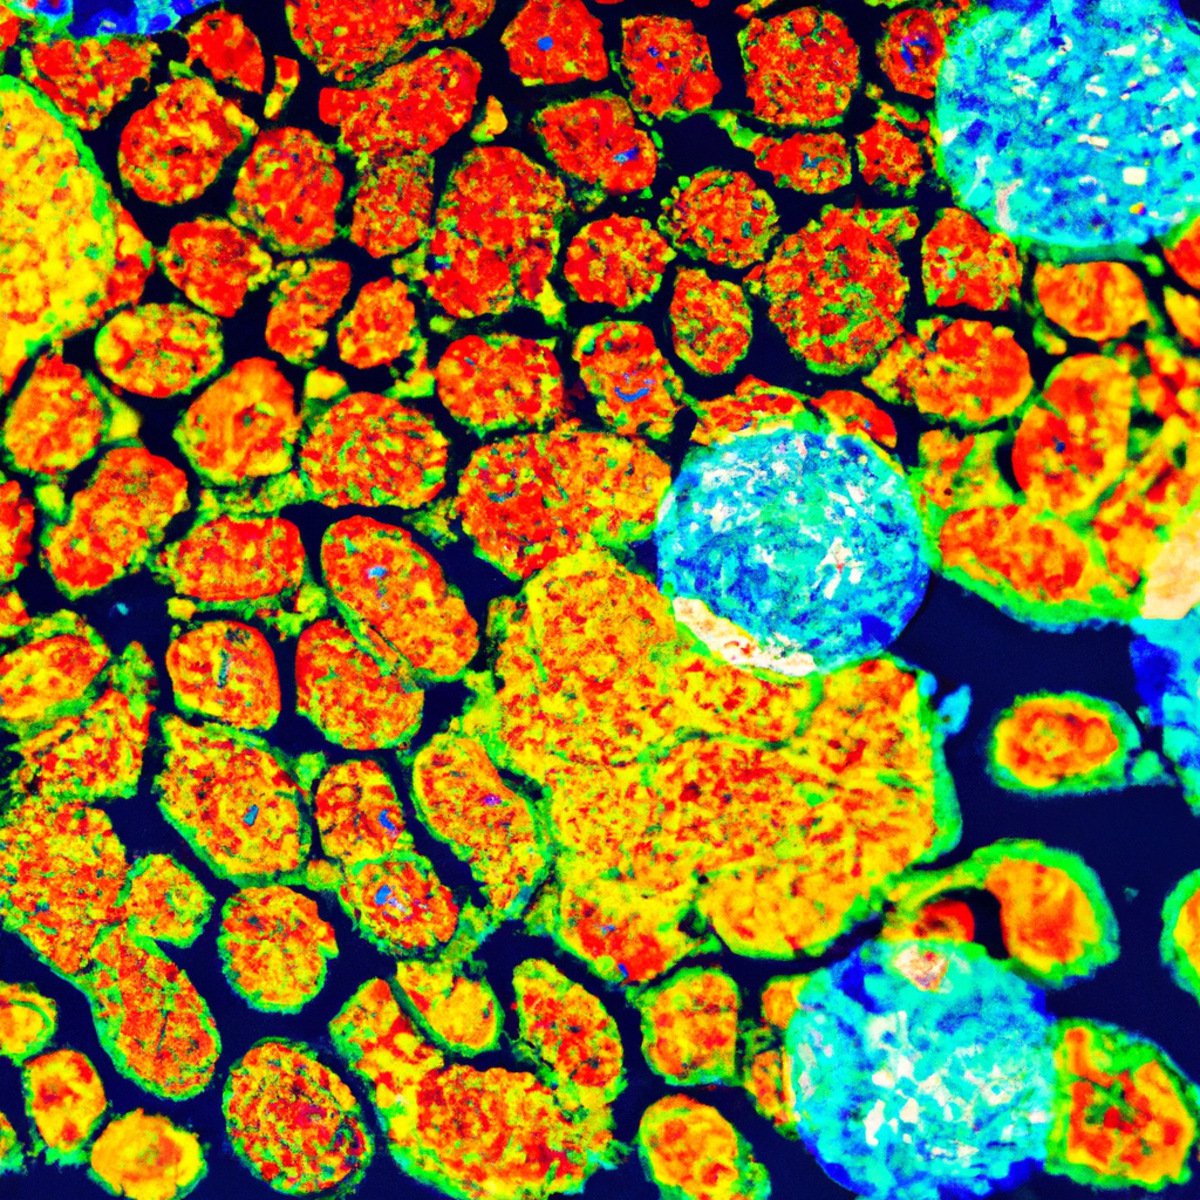 Colorful cell samples under microscope symbolize Gaucher Disease research, highlighting complexity and dedication of scientists.